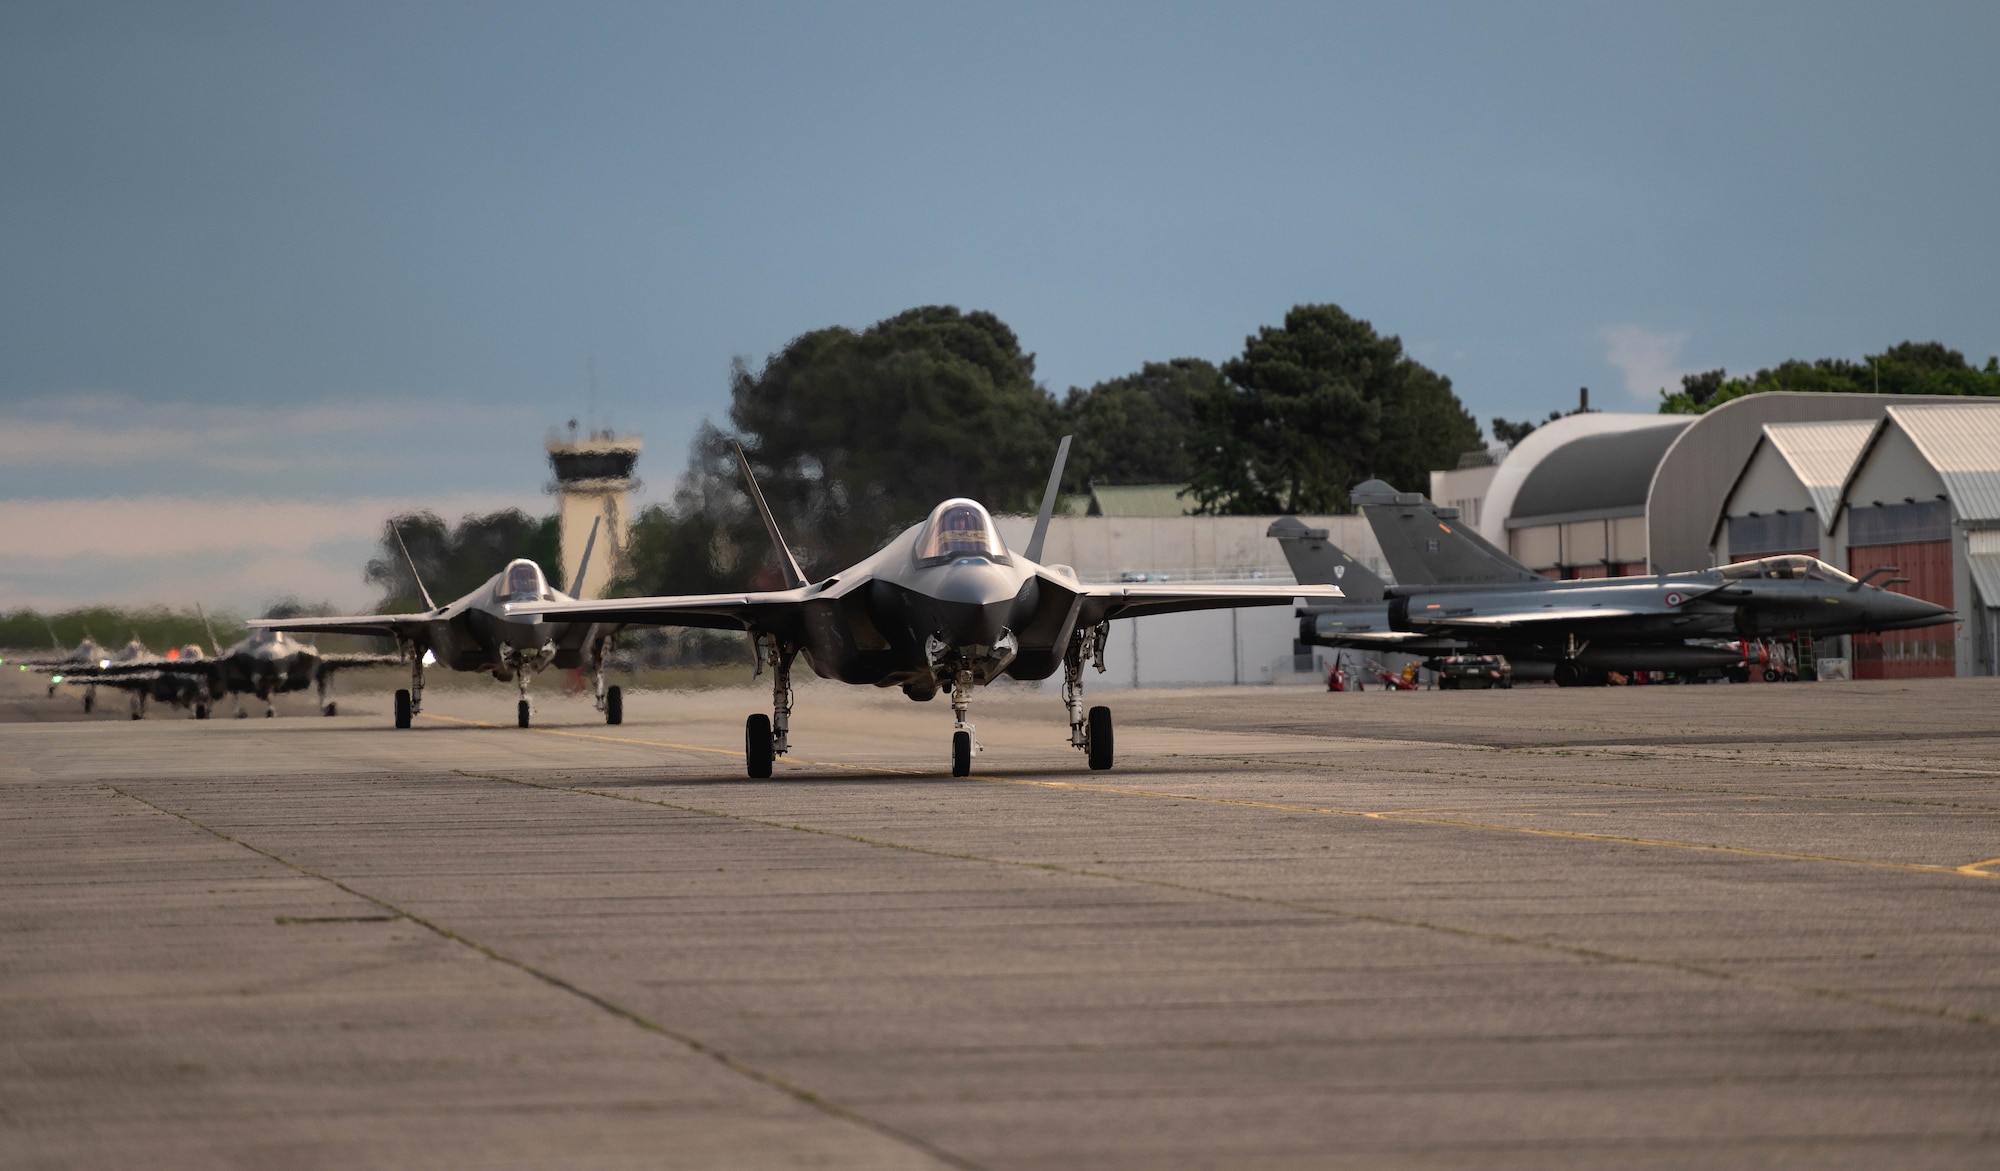 U.S. Air Force F-35A Lightning IIs assigned to the 4th Fighter Squadron, Hill Air Force Base, Utah, taxi down the flightline at Mont-de-Marsan Air Base, France, May 10, 2021. During their time in the European theater, the 4th FS aircraft will participate in multiple events, including Atlantic Trident 21, underscoring the steadfast U.S. commitment to the region and enhancing interoperability with NATO allies and partners. (U.S. Air Force photo by Staff Sgt. Alexander Cook)